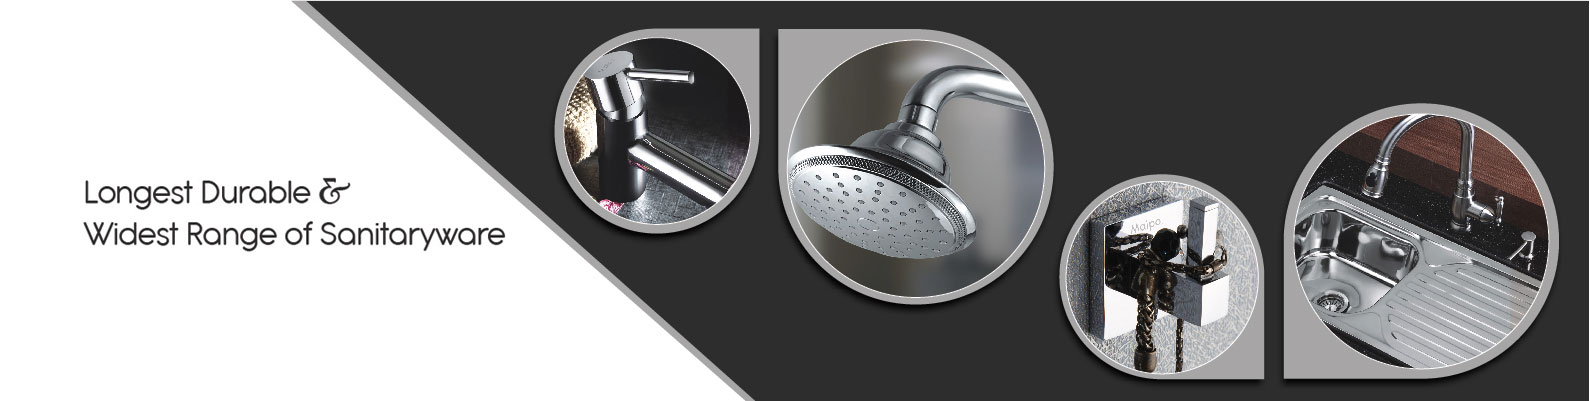 Bath Faucet Manufacturers in India